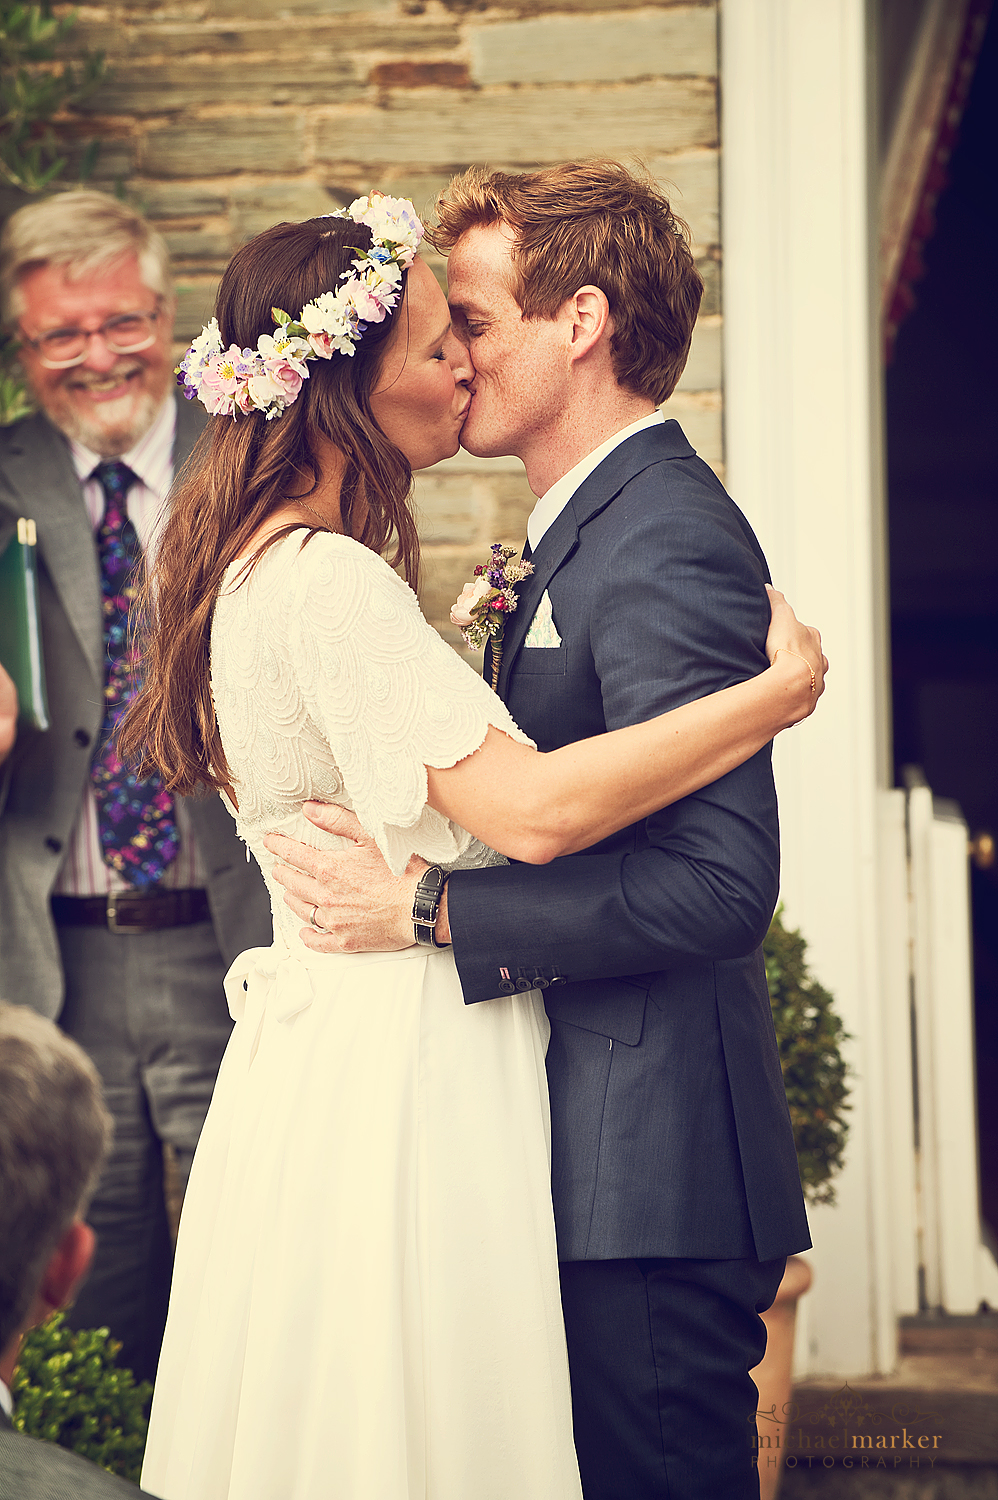 Bride and groom kiss at Shilstone House wedding ceremony